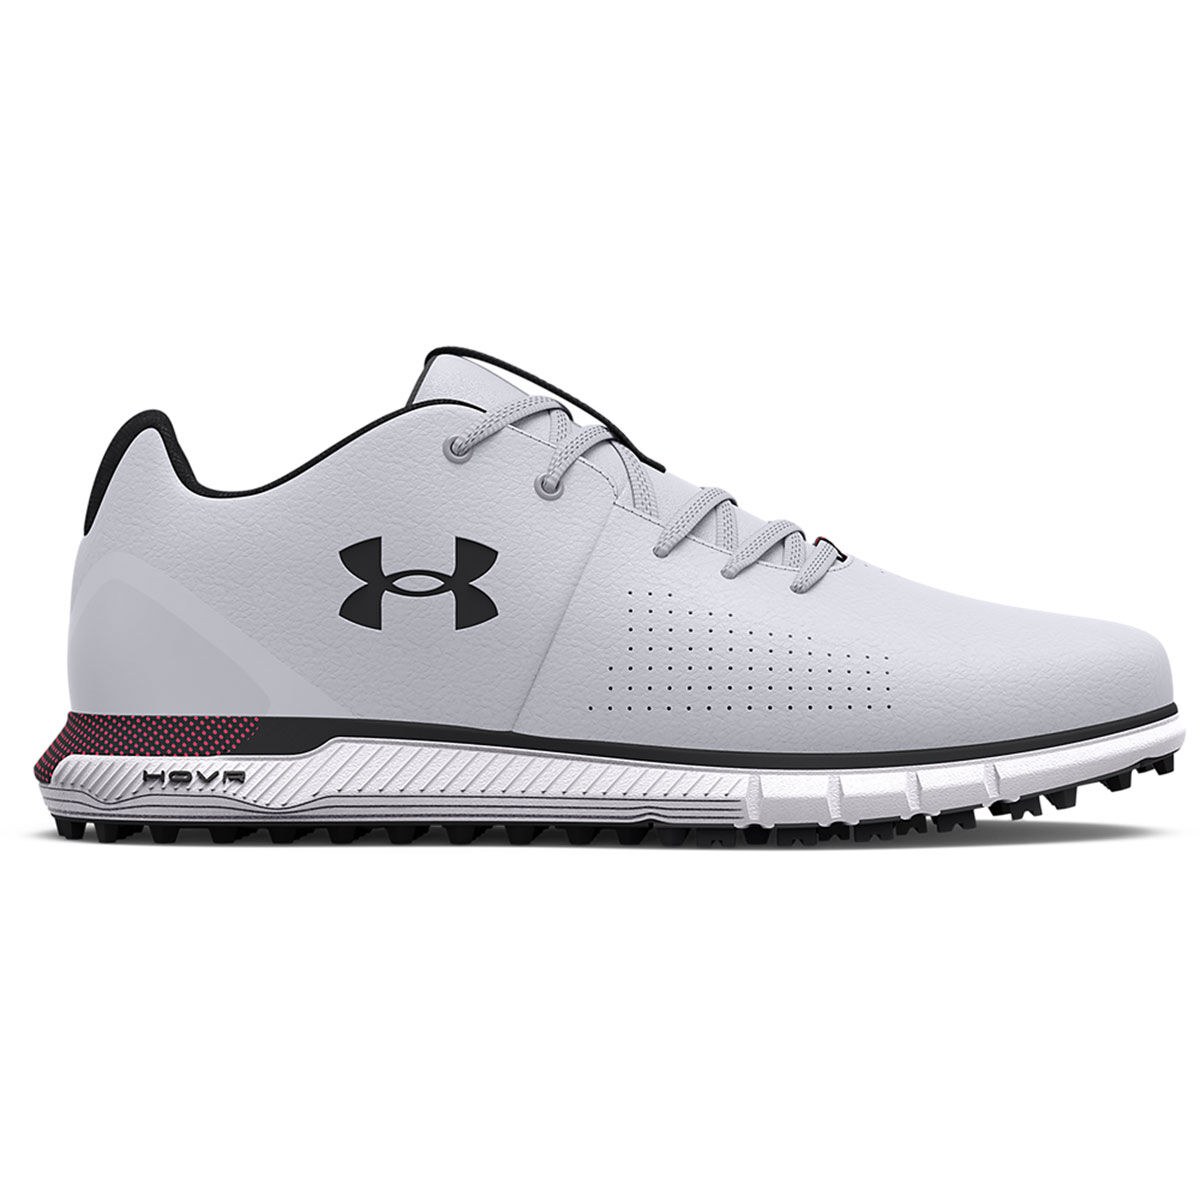 Under Armour Mens Grey and Black HOVR Fade 2 Wide Golf Shoes, Size: 10 | American Golf